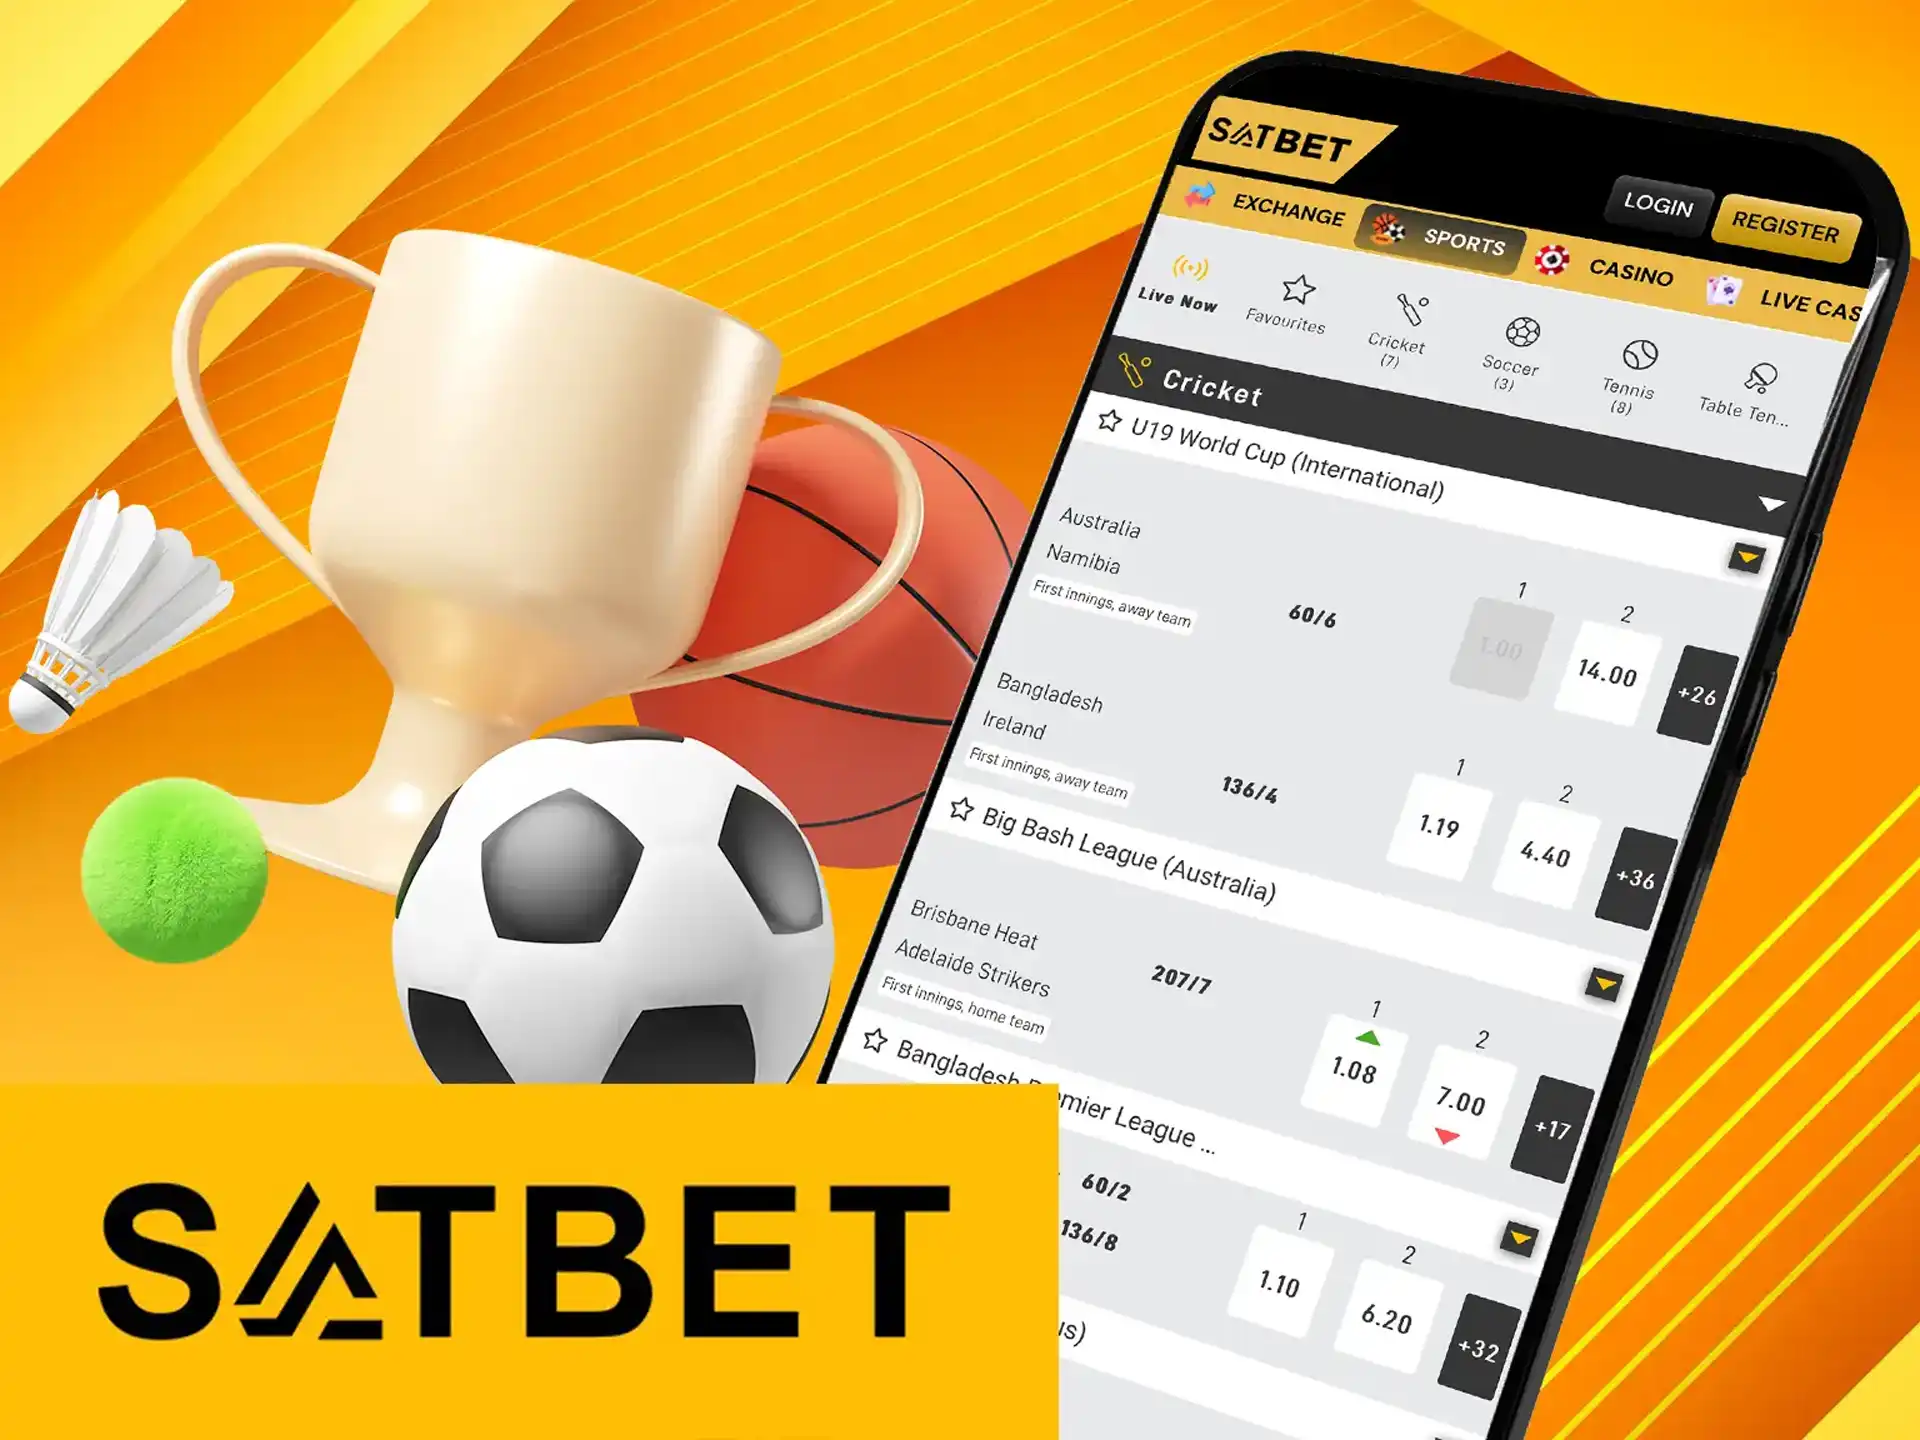 The Satbet app is fully legal and secure and allows you to bet on sports.